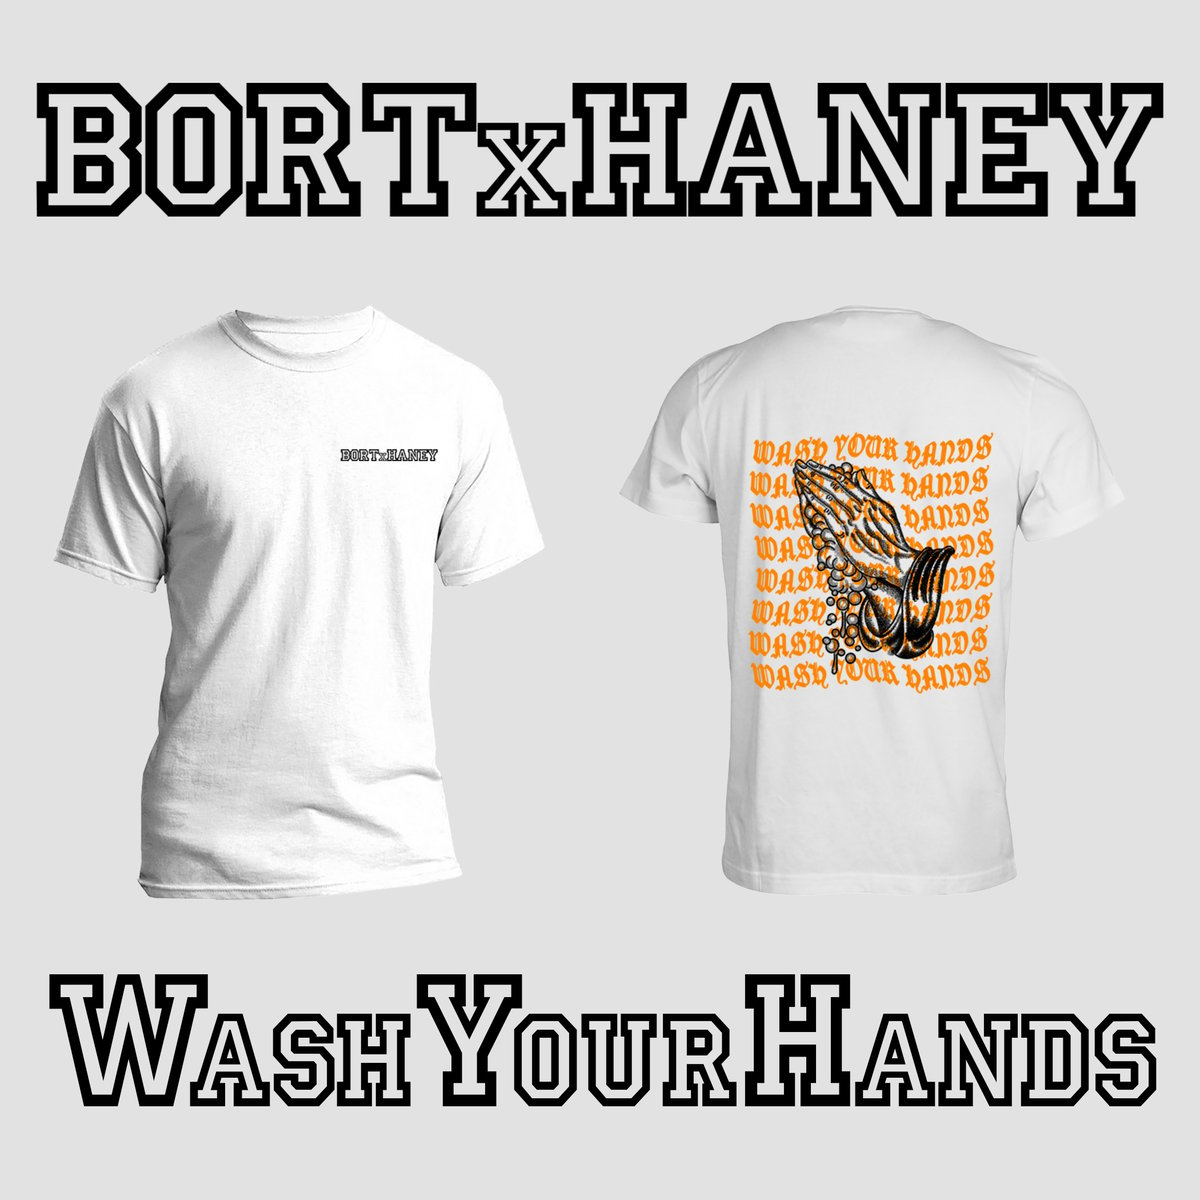 Image of Wash Your Hands BORTxHANEY